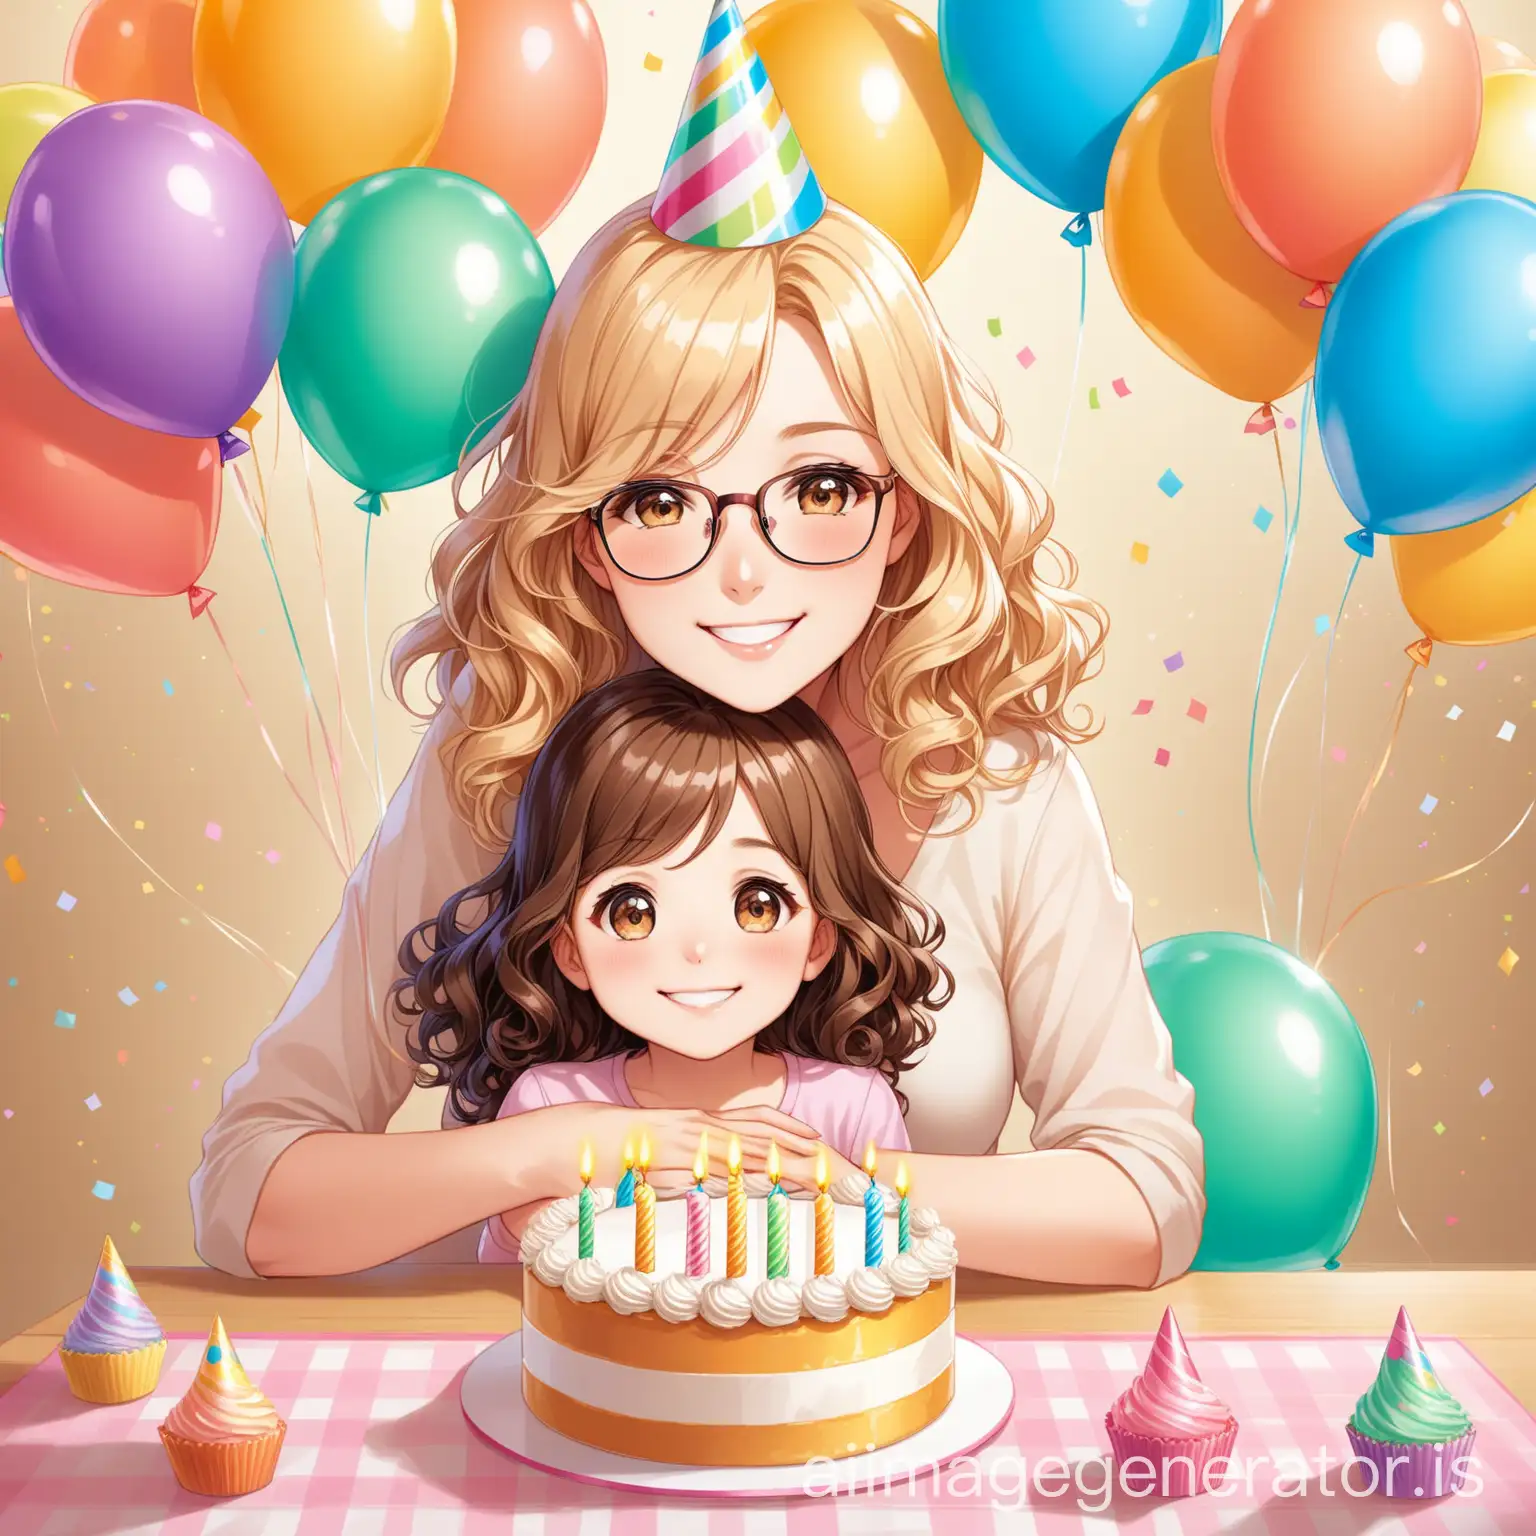 A mother hugging her daughter and they are wearing party hats, and there are some balloons upon their heads, they are smiling and looking at the camera, it is mother's birthday, the cake is on a table in front of them, they are happy. The mother has curly medium blond hair and the daughter has glasses and medium dark brown wavy hair.